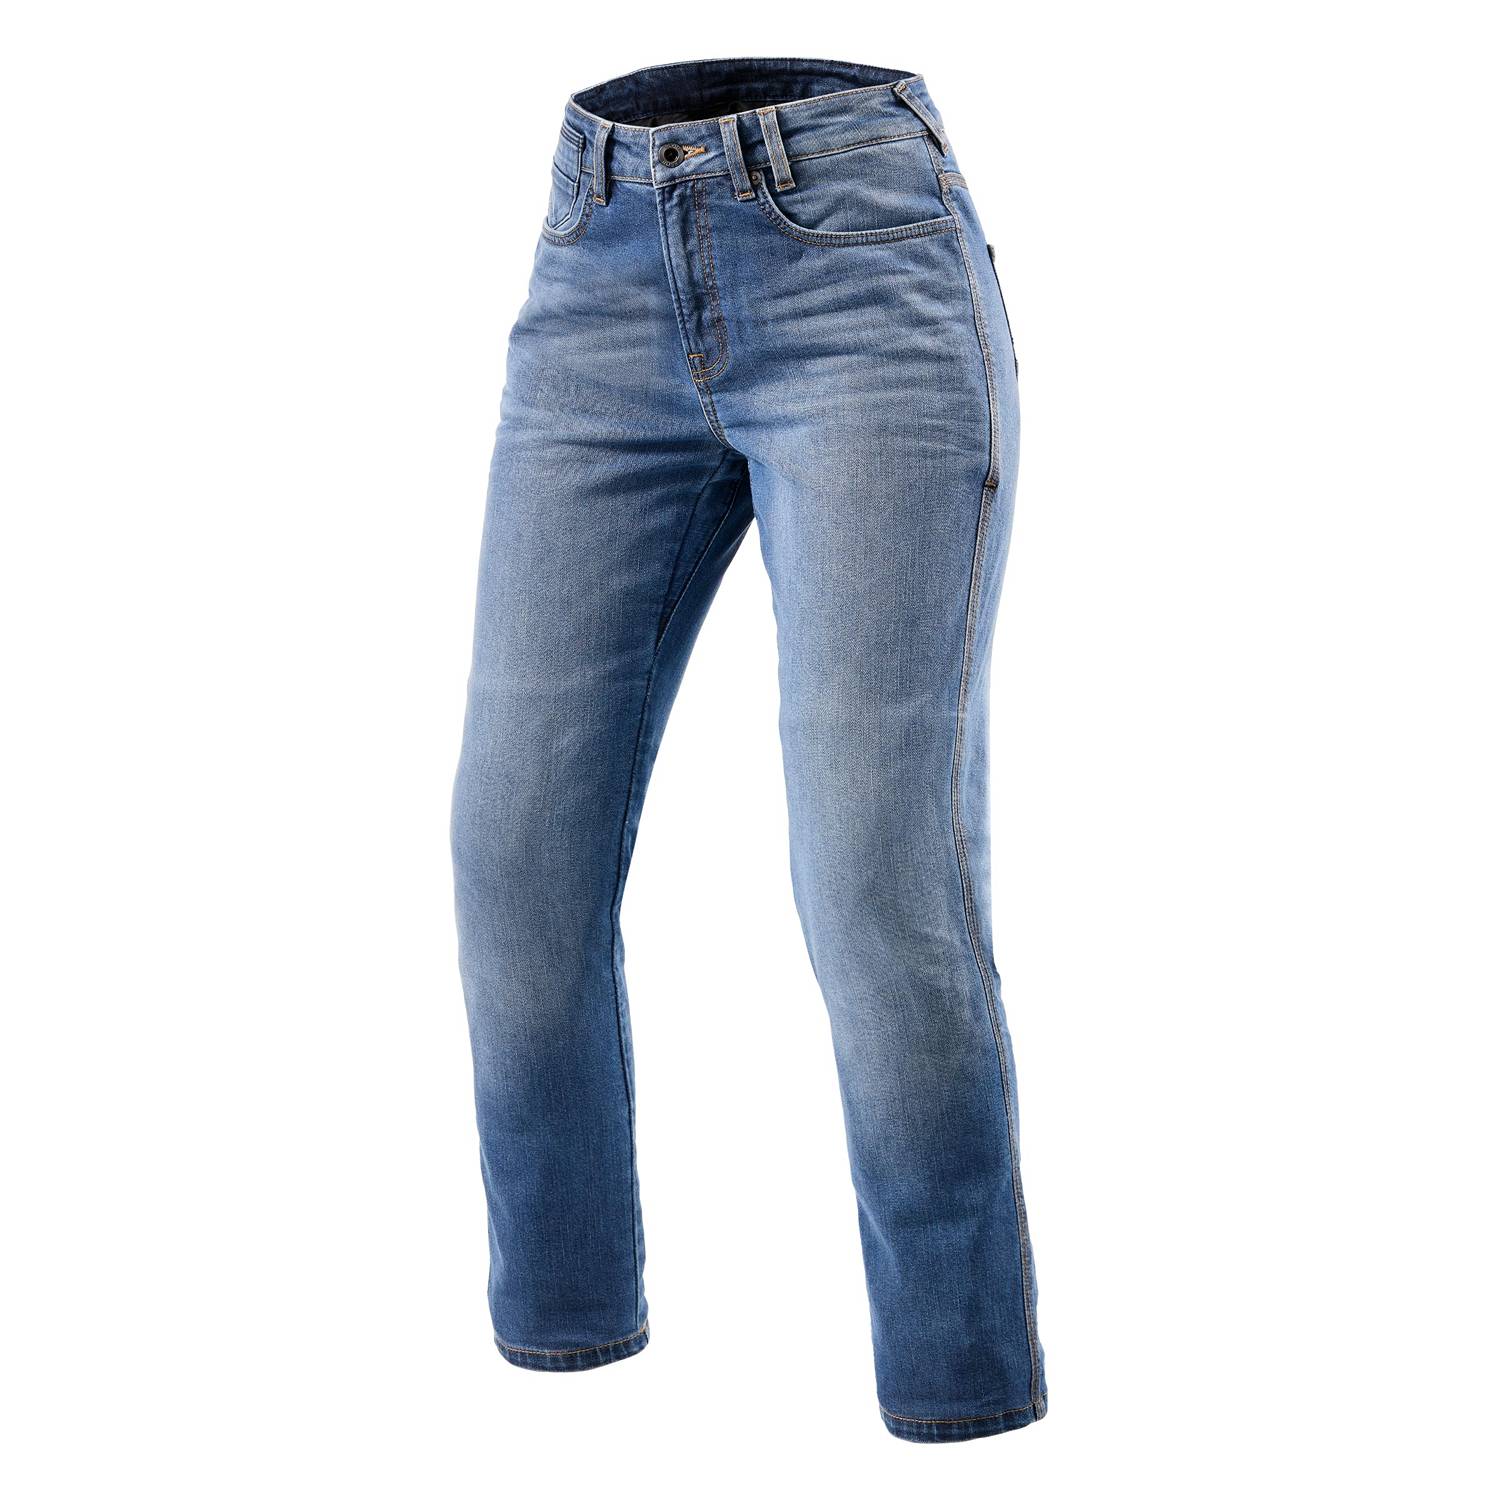 Image of REV'IT! Jeans Victoria 2 Ladies SF Classic Blue Used Motorcycle Jeans Size L30/W28 ID 8700001343121